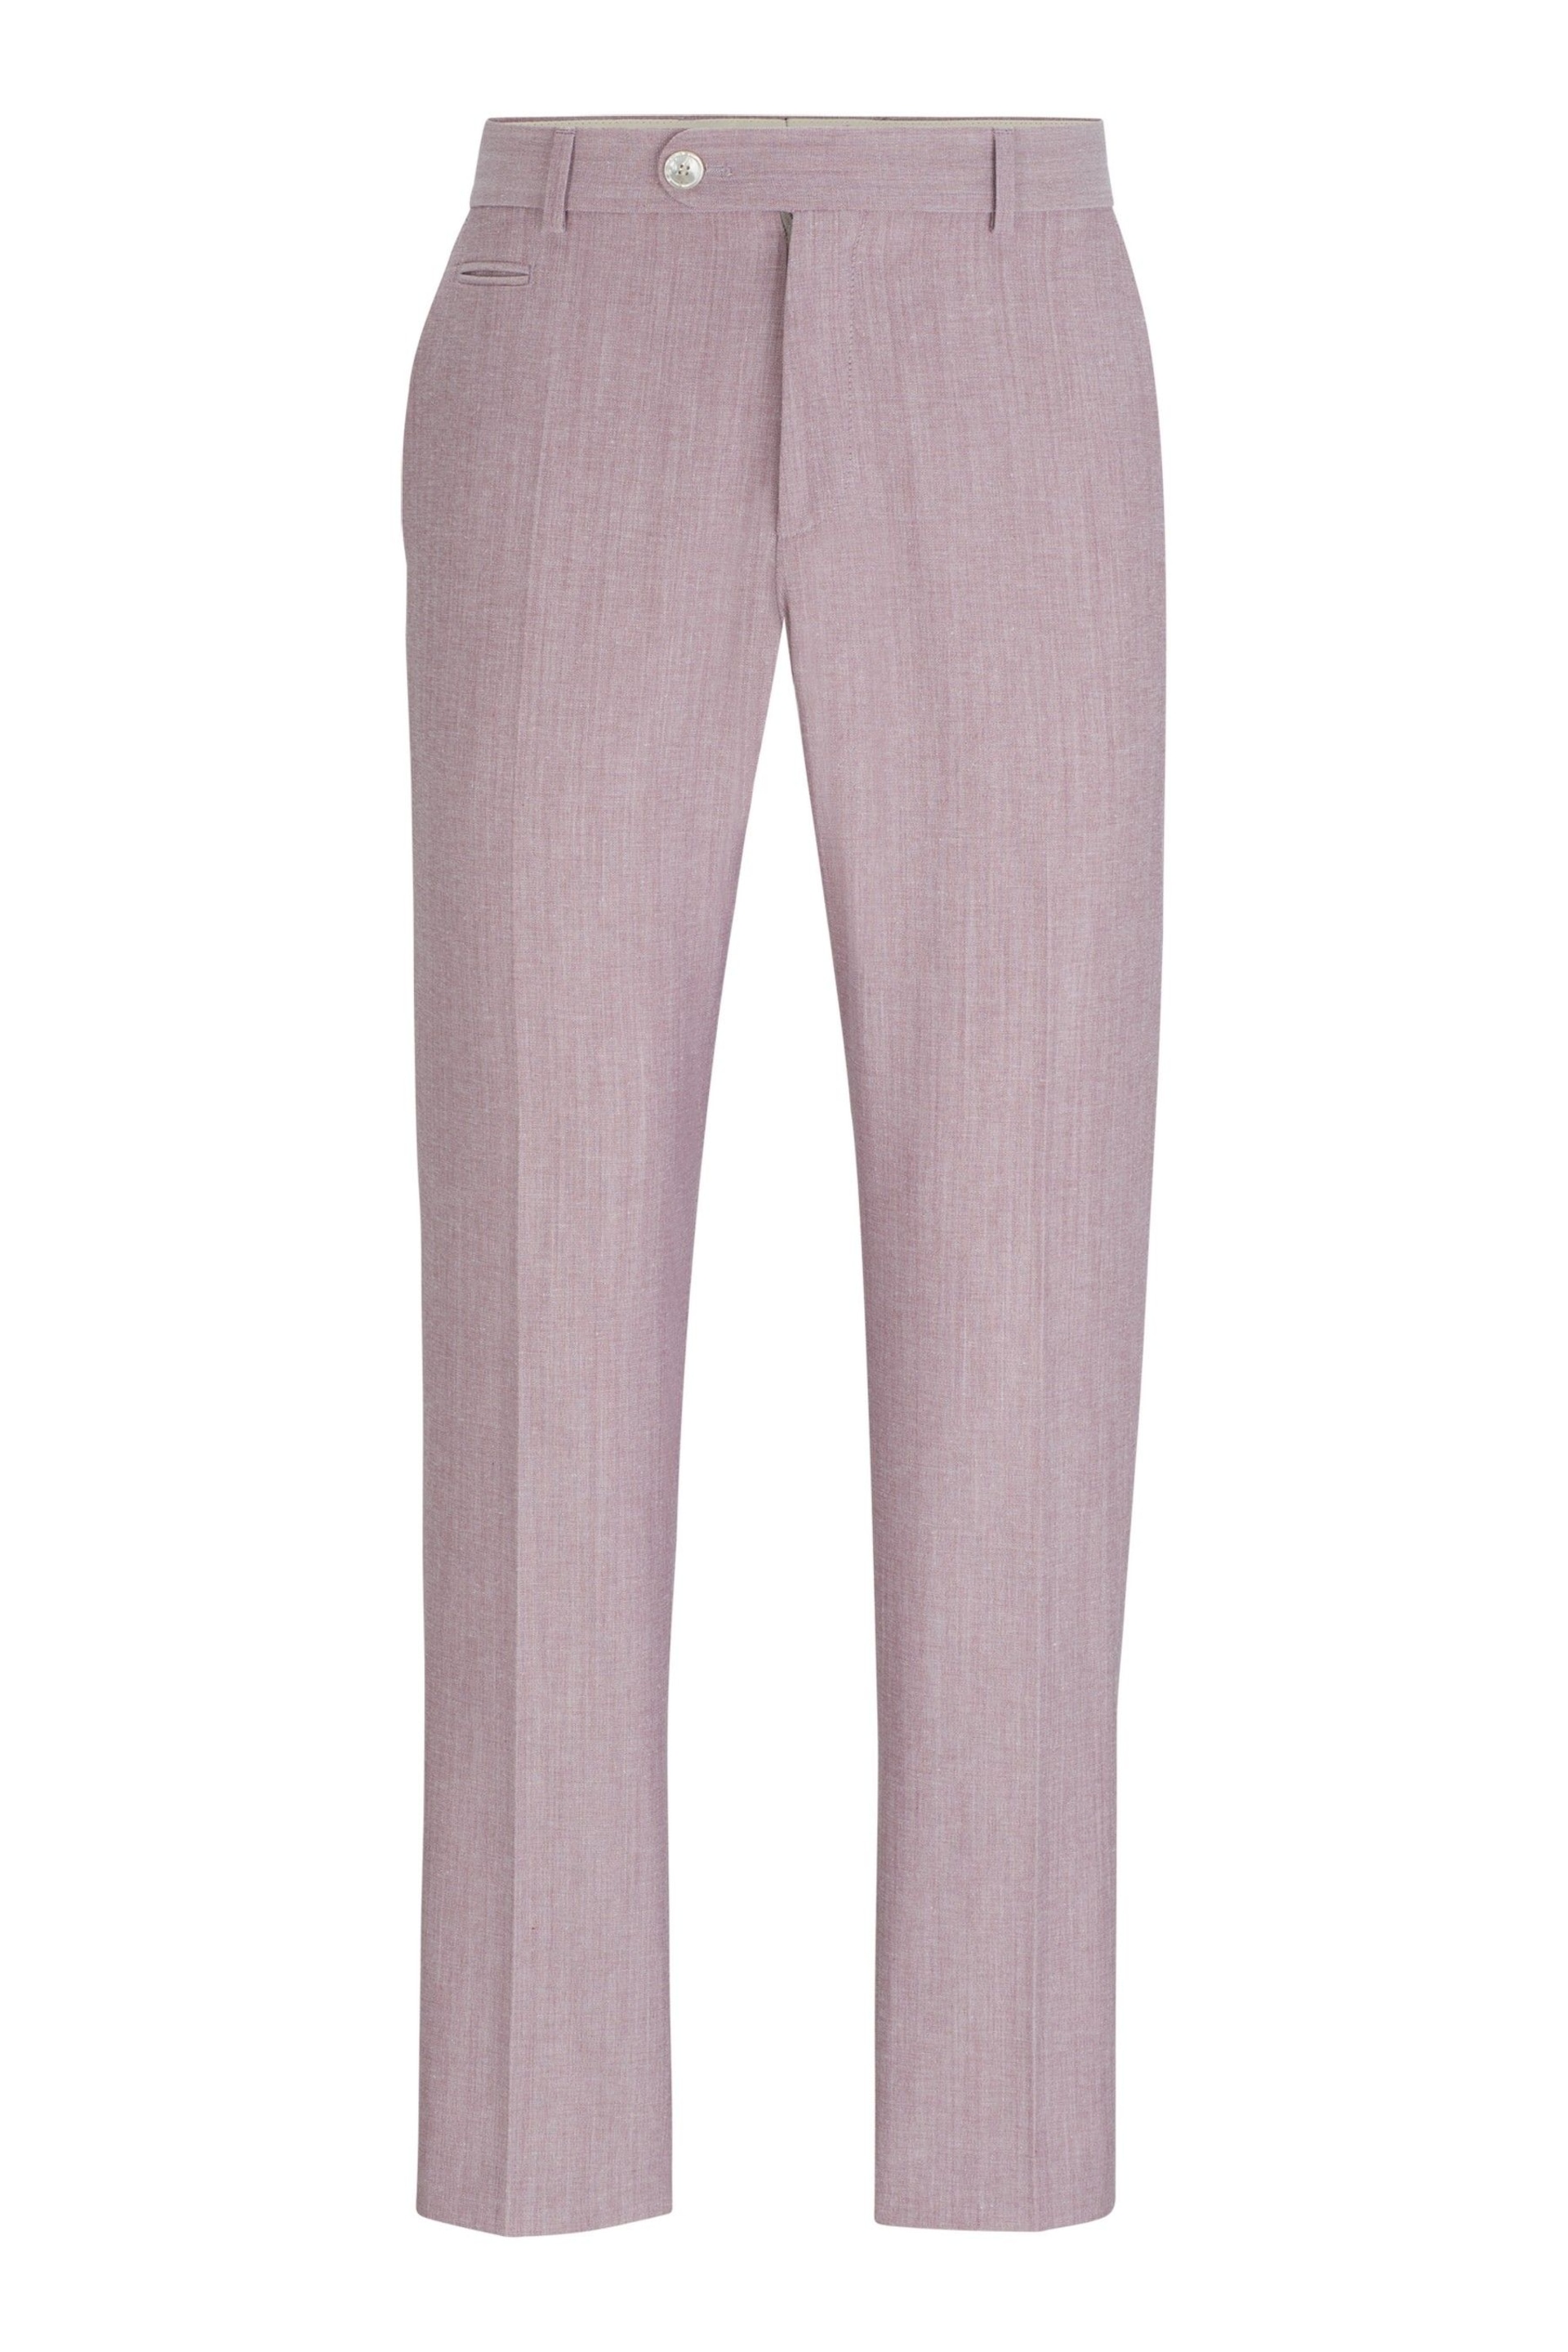 BOSS Pink Slim-Fit Trousers In A Micro-Patterned Cotton Blend - Image 5 of 5